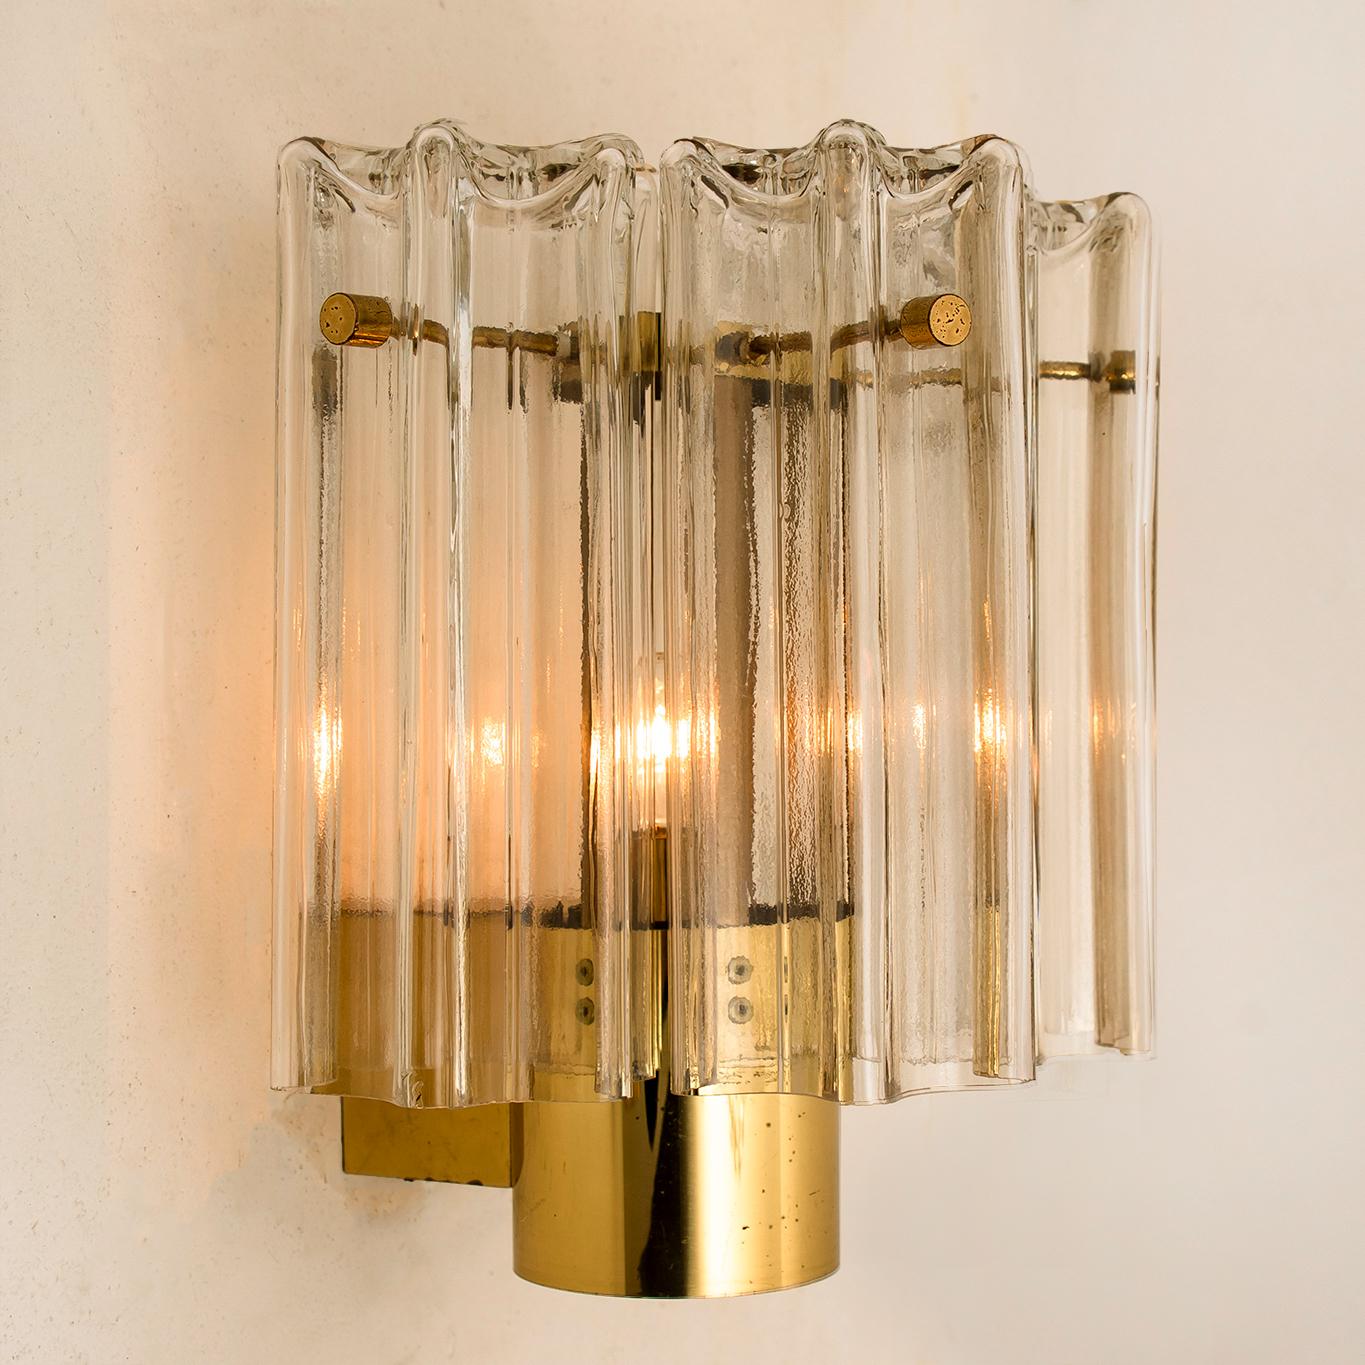 A wonderful pair of Murano glass wall lights designed by J.T. Kalmar for Kalmar Franken, Vienna, Austria. Manufactured in circa 1960s. These wall lights are handmade and a high quality pieces. Murano tubes in clear glass hanging on a brass plate.